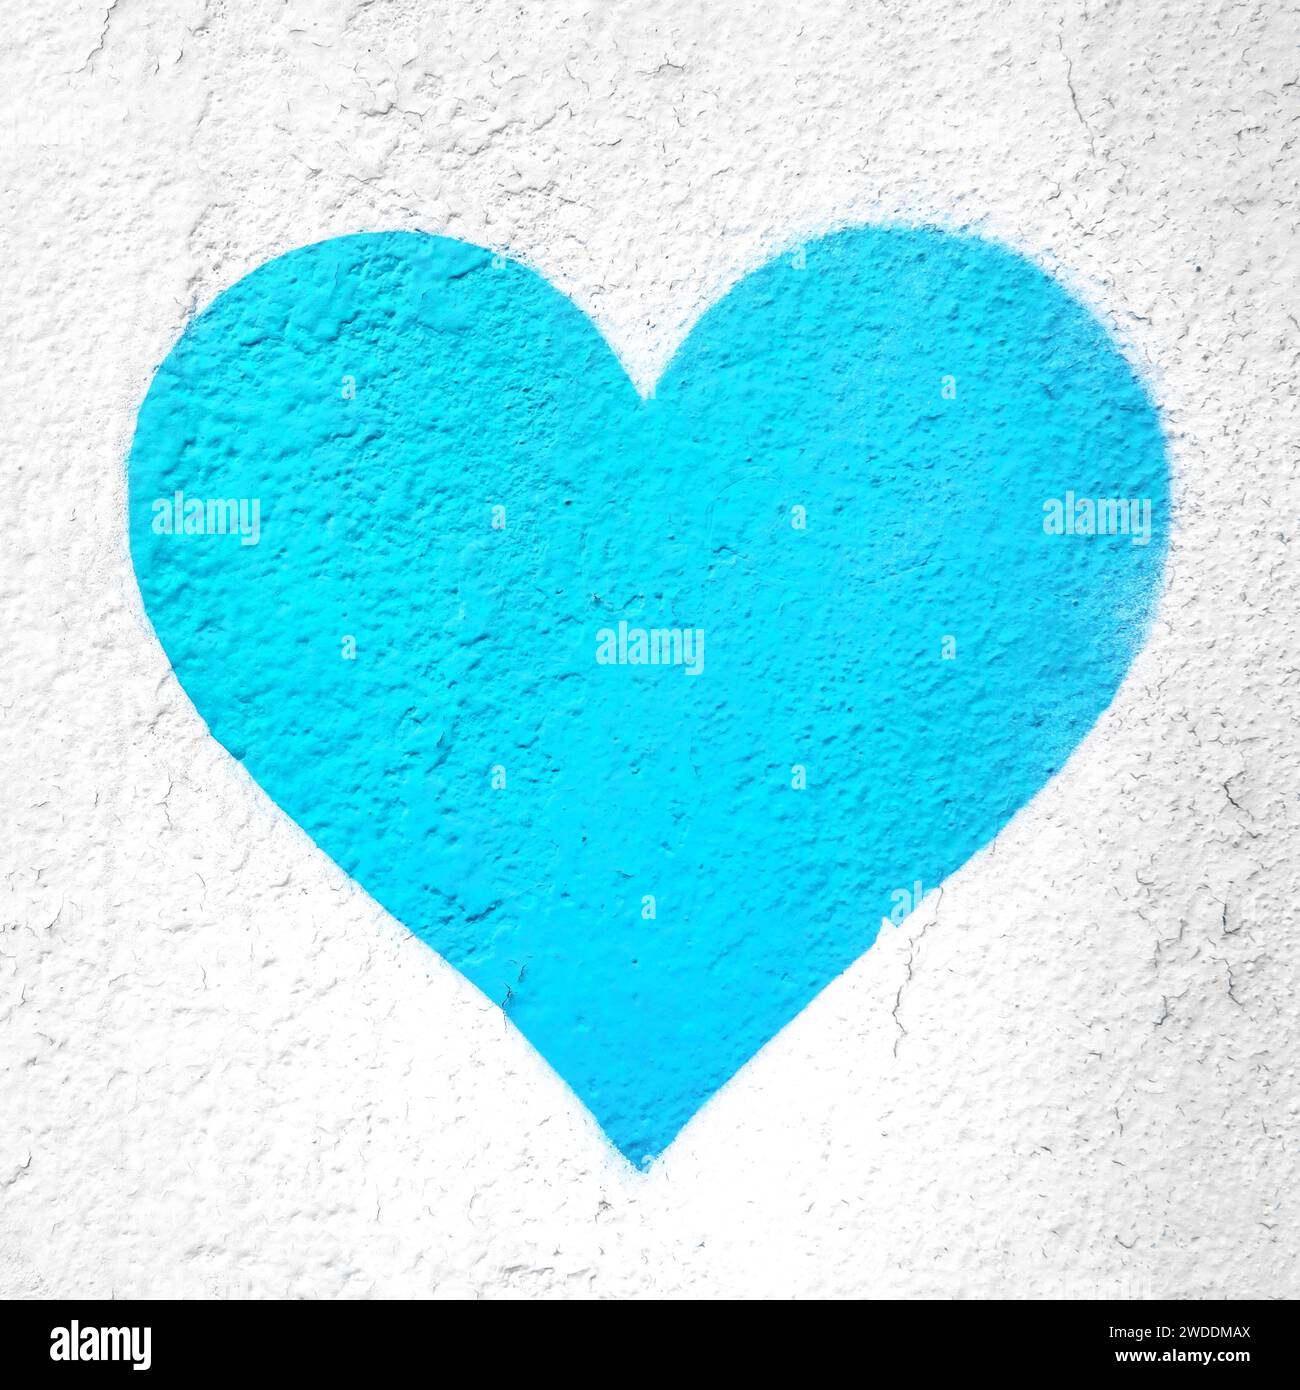 Azure heart on wall. Azure love heart hand drawn on grungy wall. Textured background trendy street style. Stock Photo